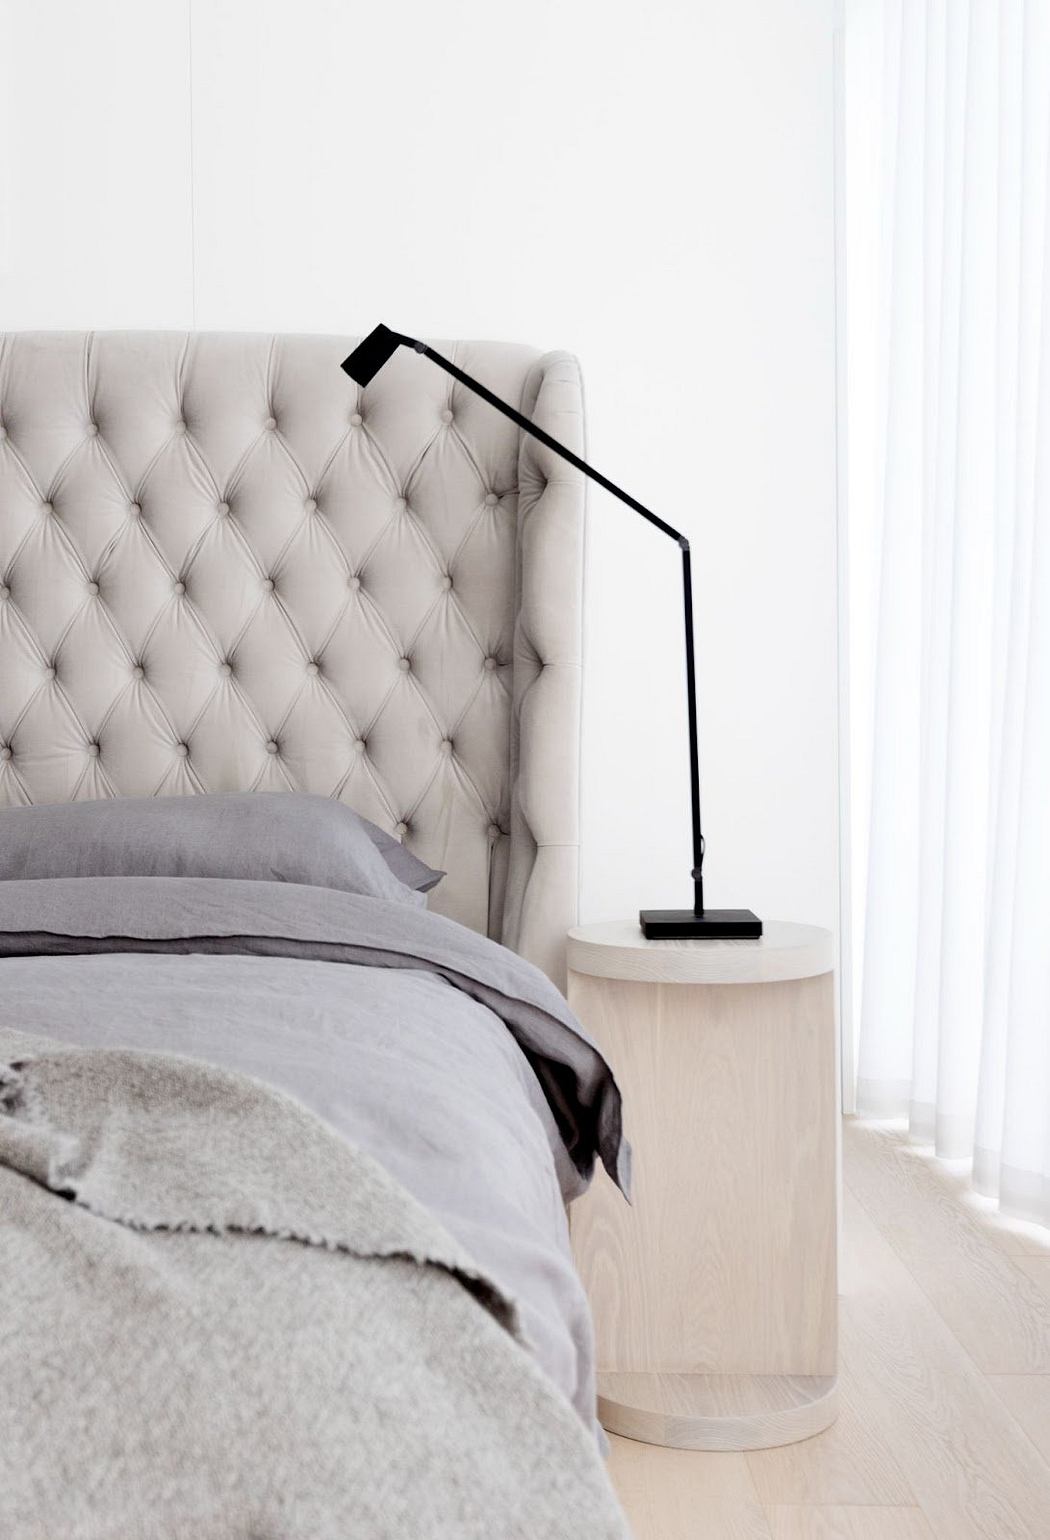 Minimalist bedroom with tufted headboard and modern bedside lamp.